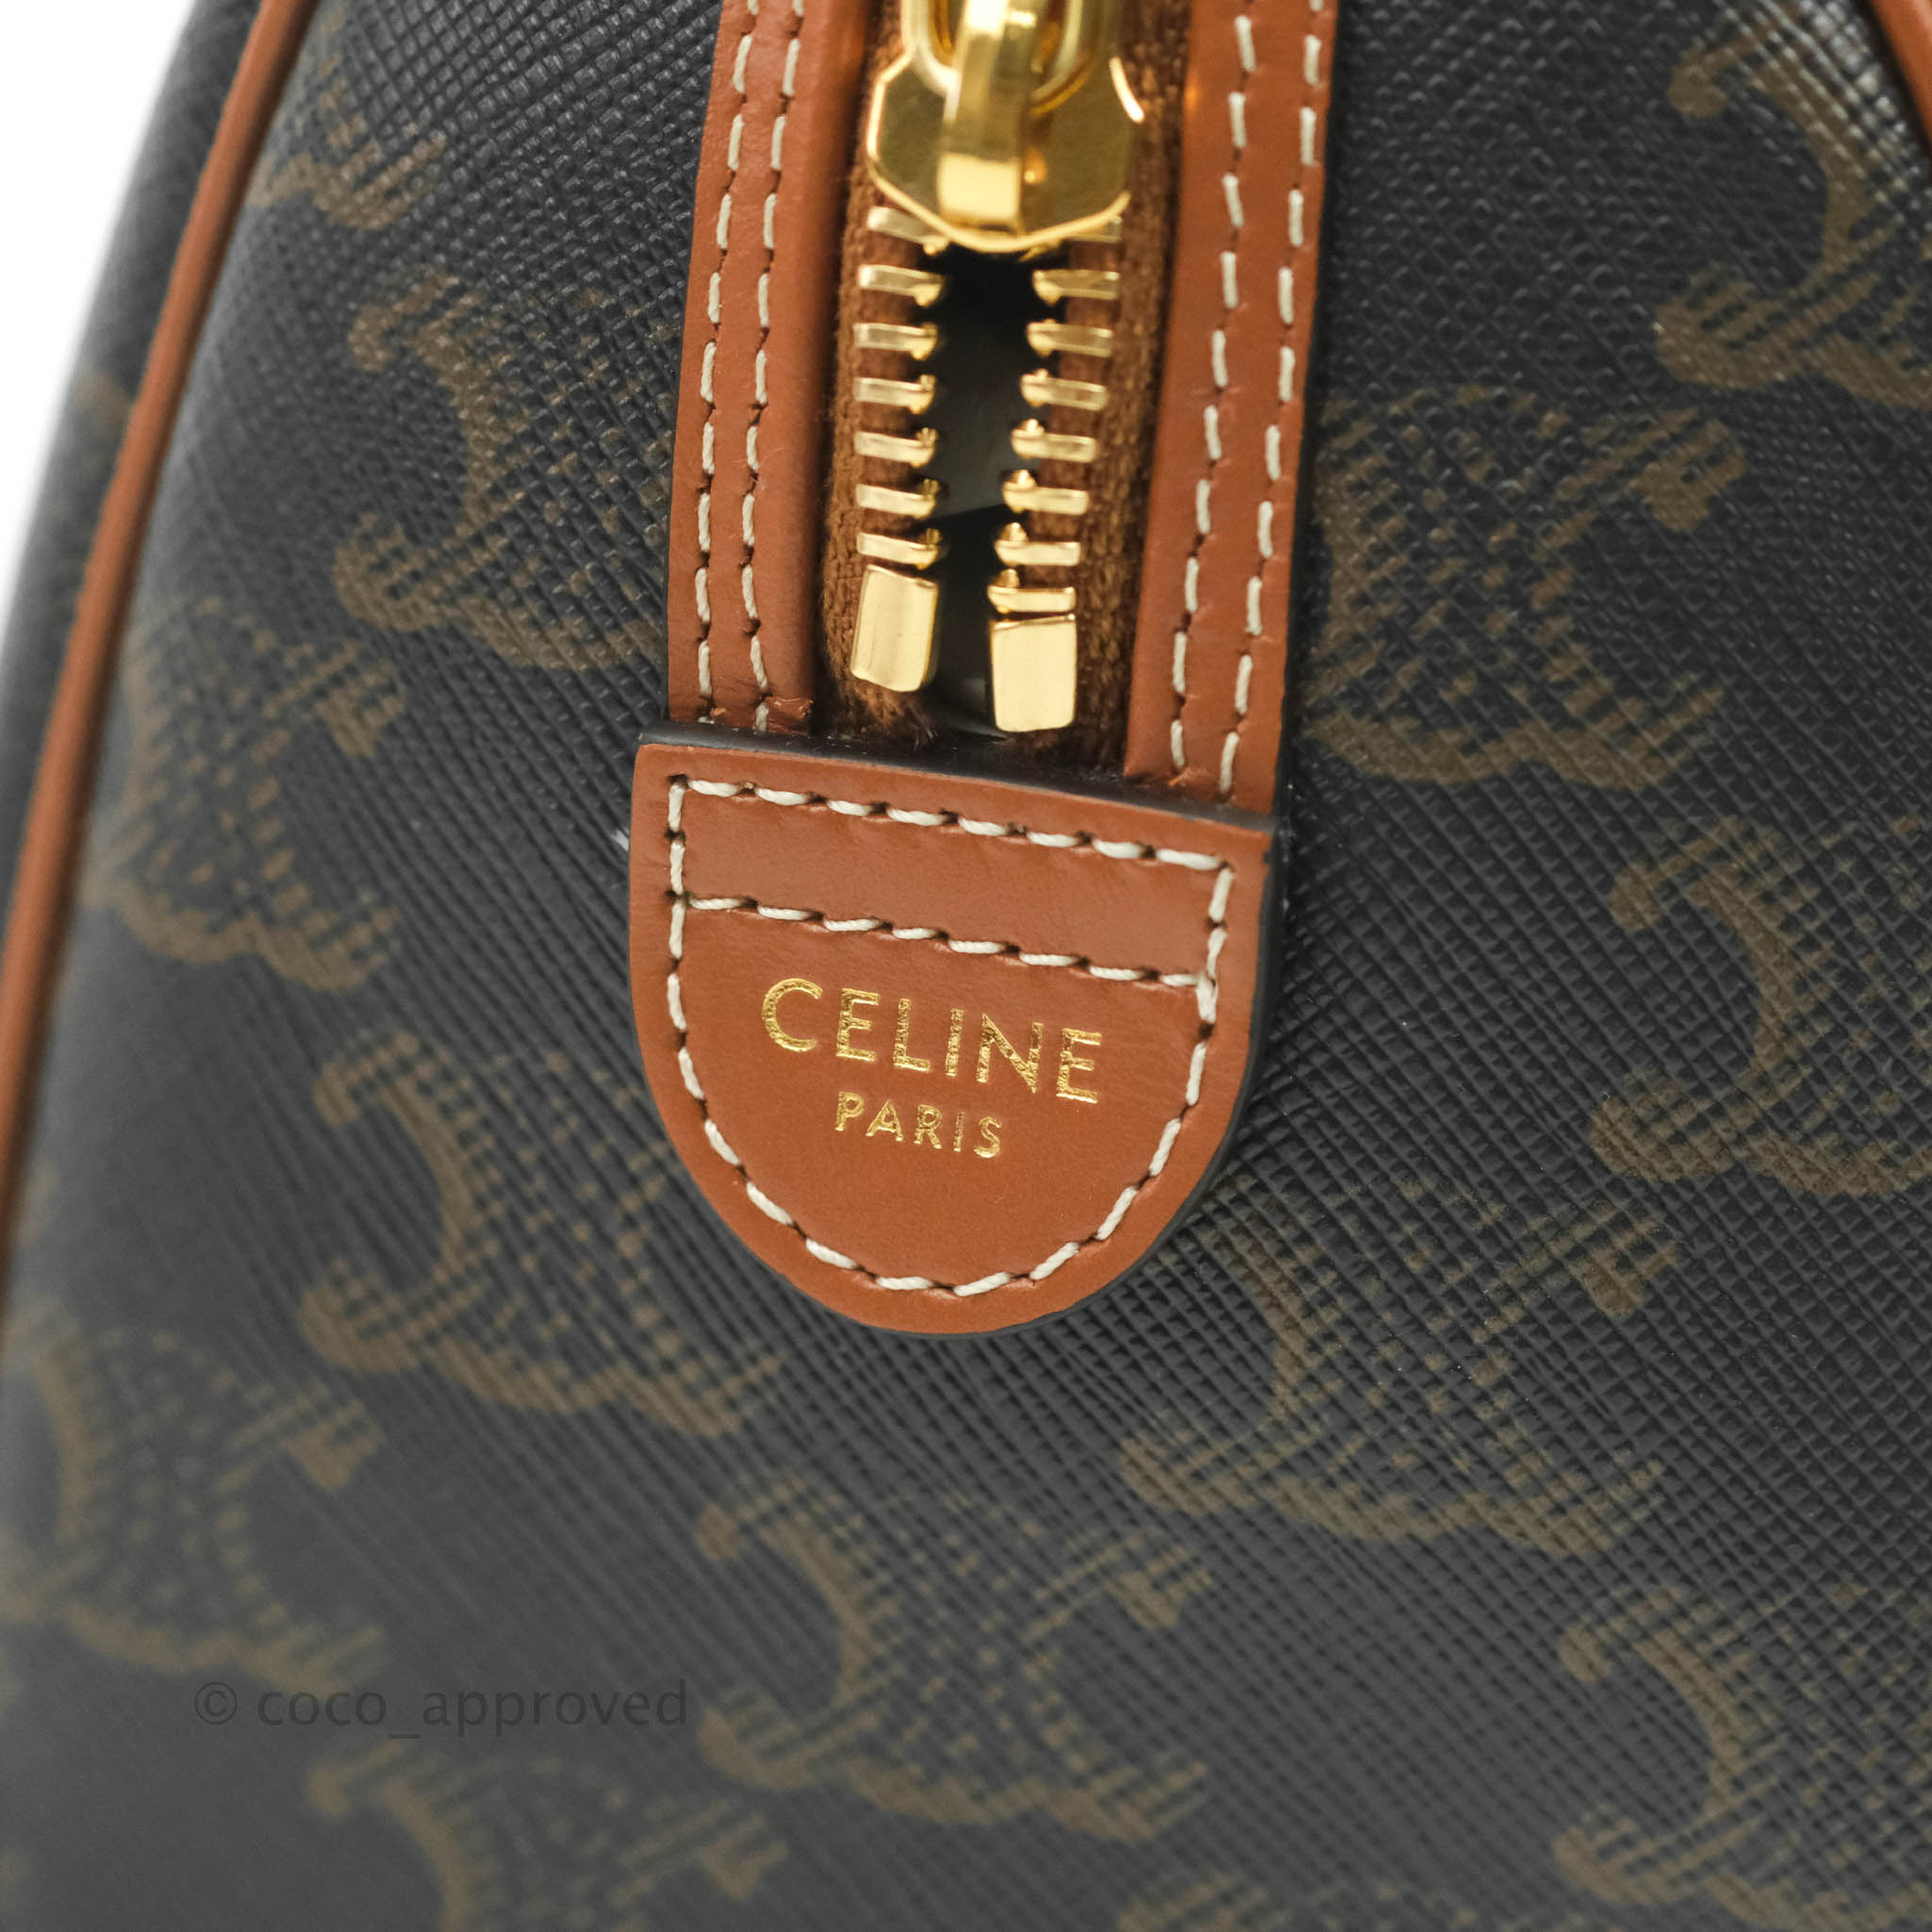 Celine Small Boston In Triomphe Canvas And Calfskin - Kaialux